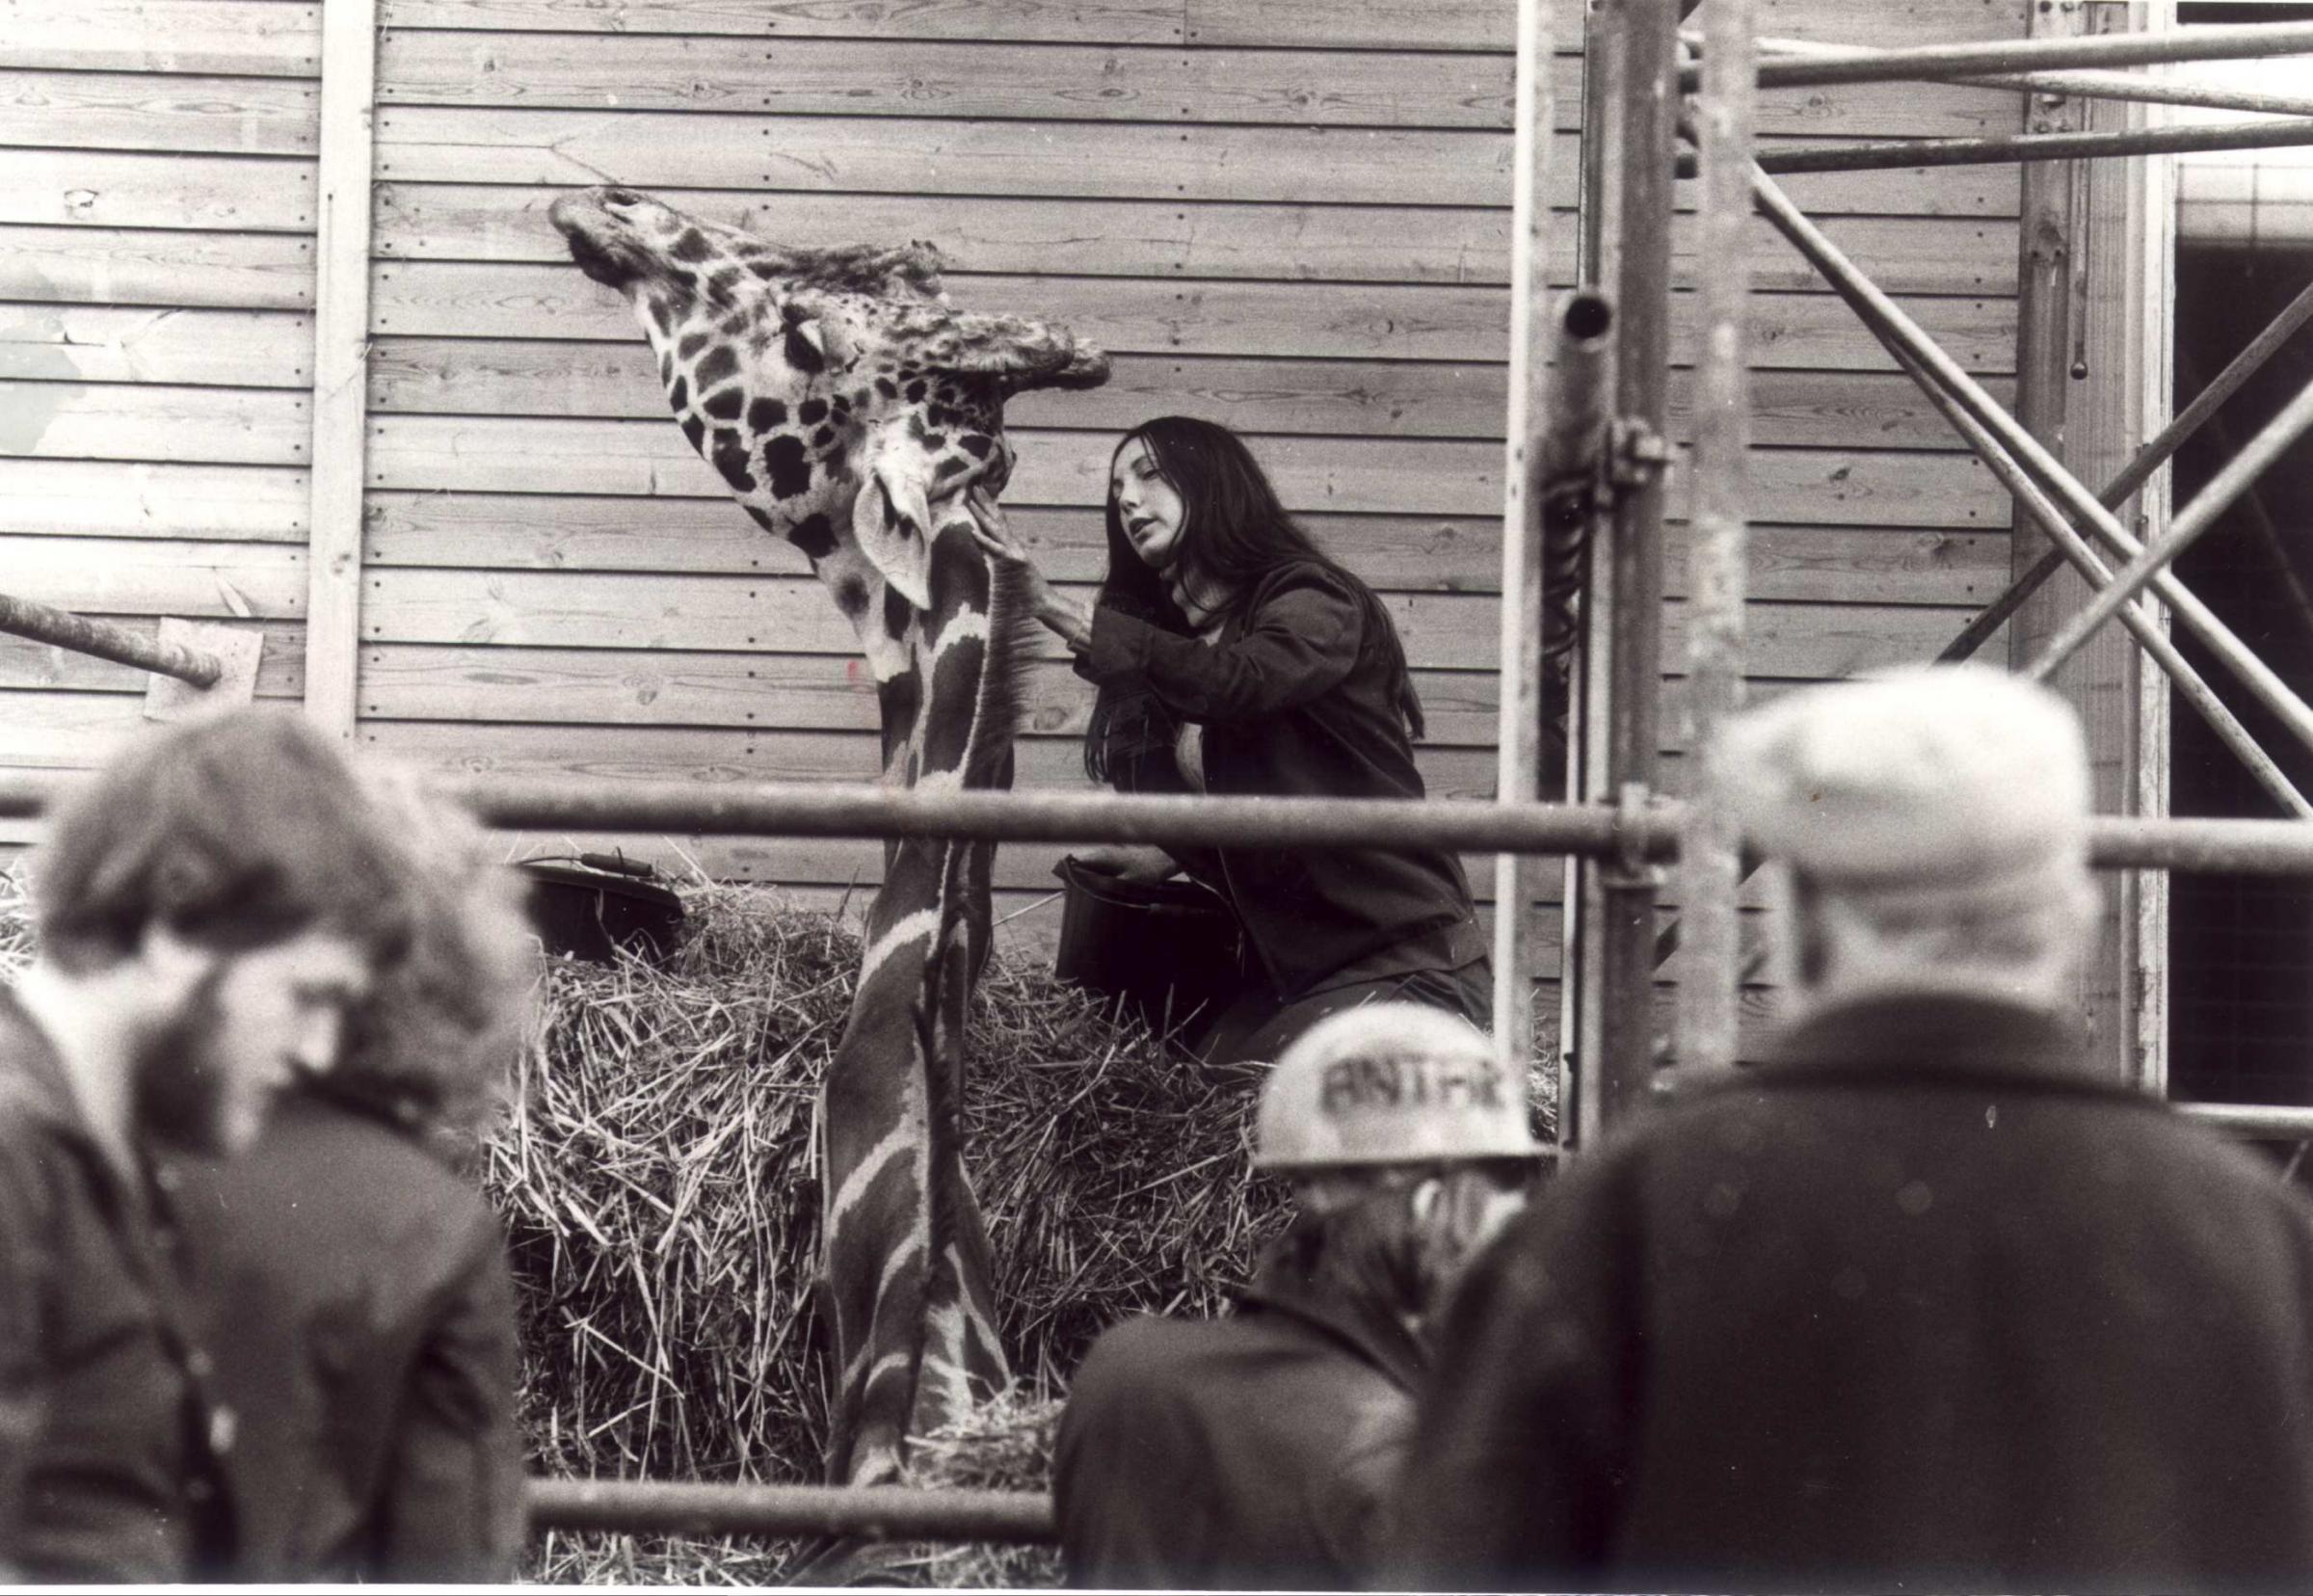 HERITAGE. Victor the giraffe at Marwell Zoo. 20/9/77.#